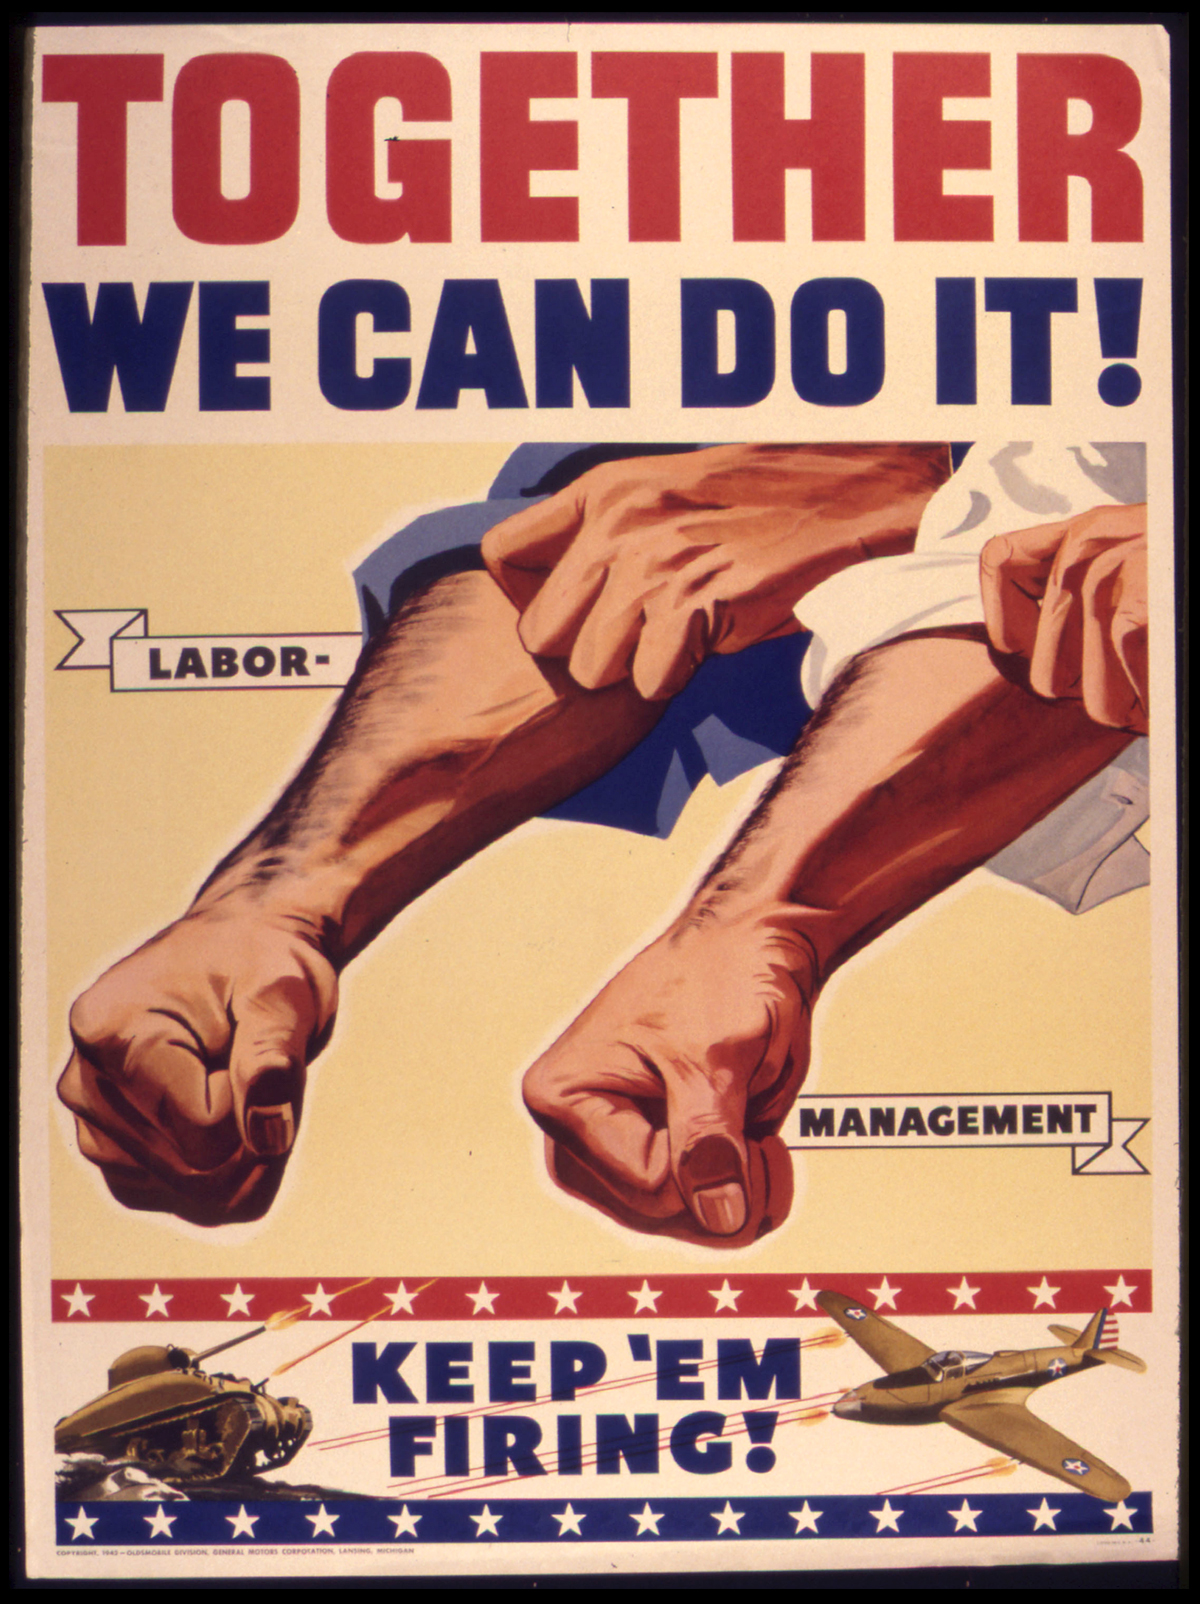 an propaganda poster depicting some people helping and support